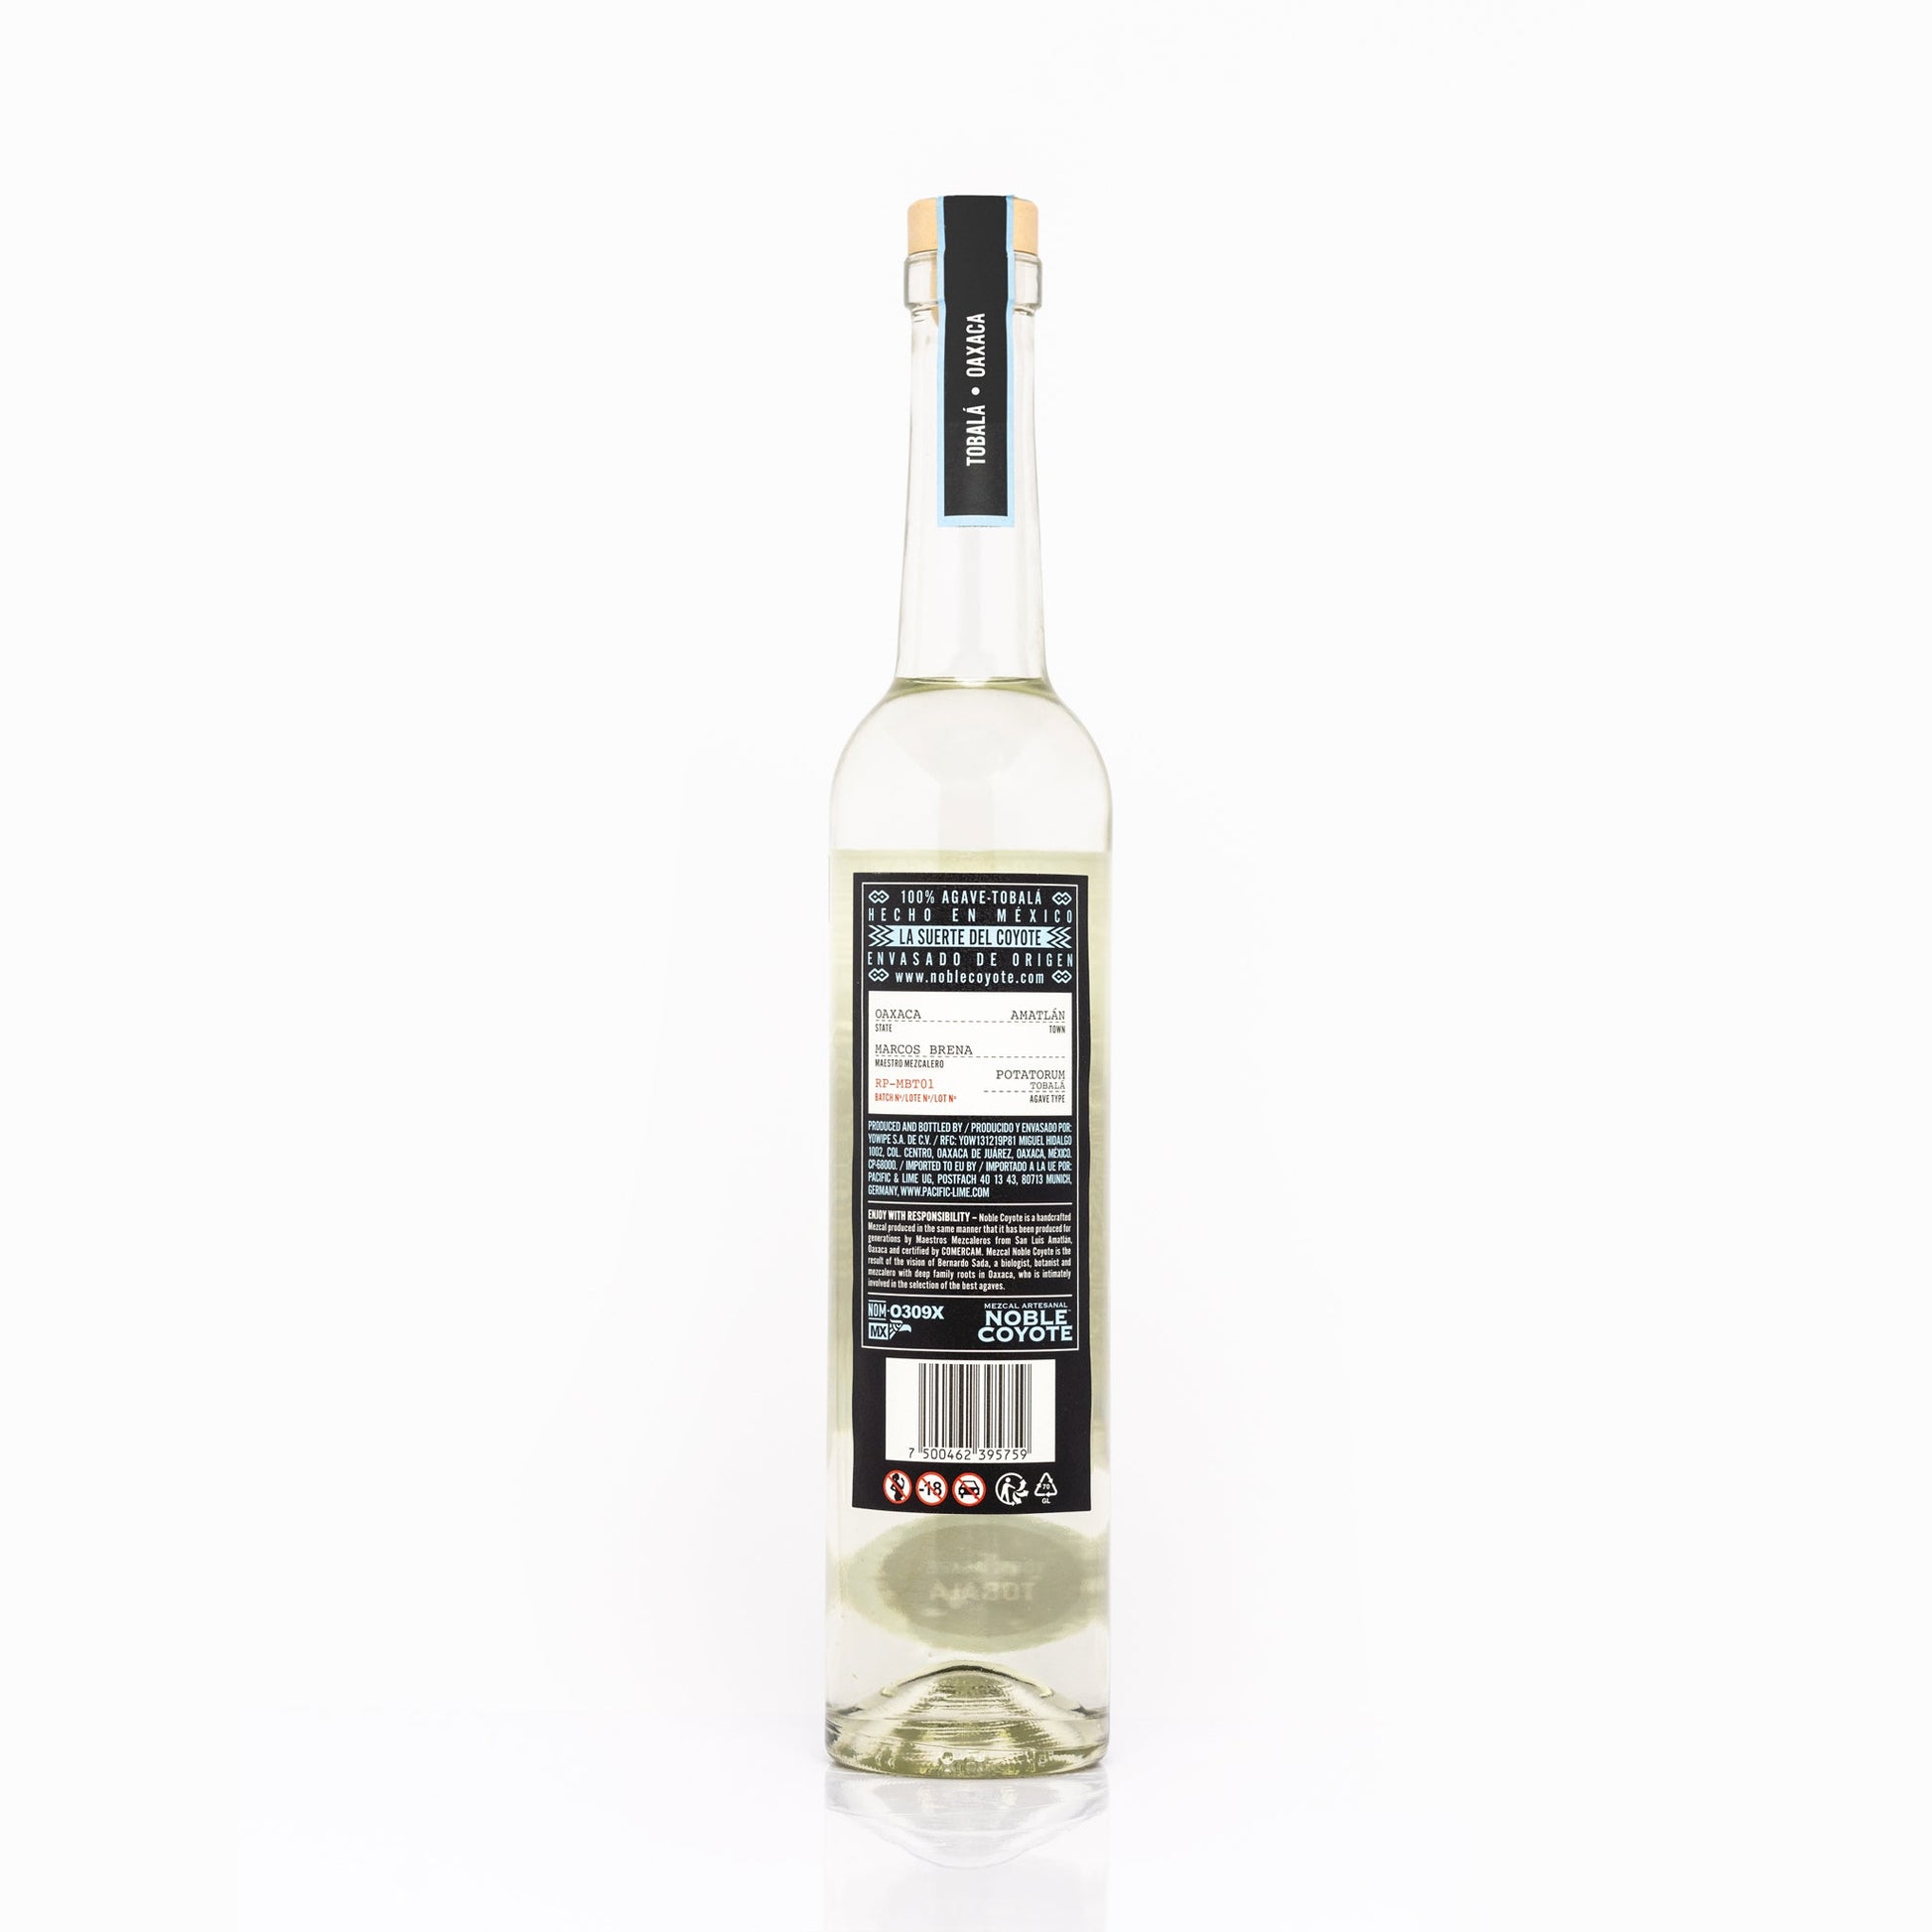 Tobala ∙ 0.5L / 48.5% - Pacific and Lime